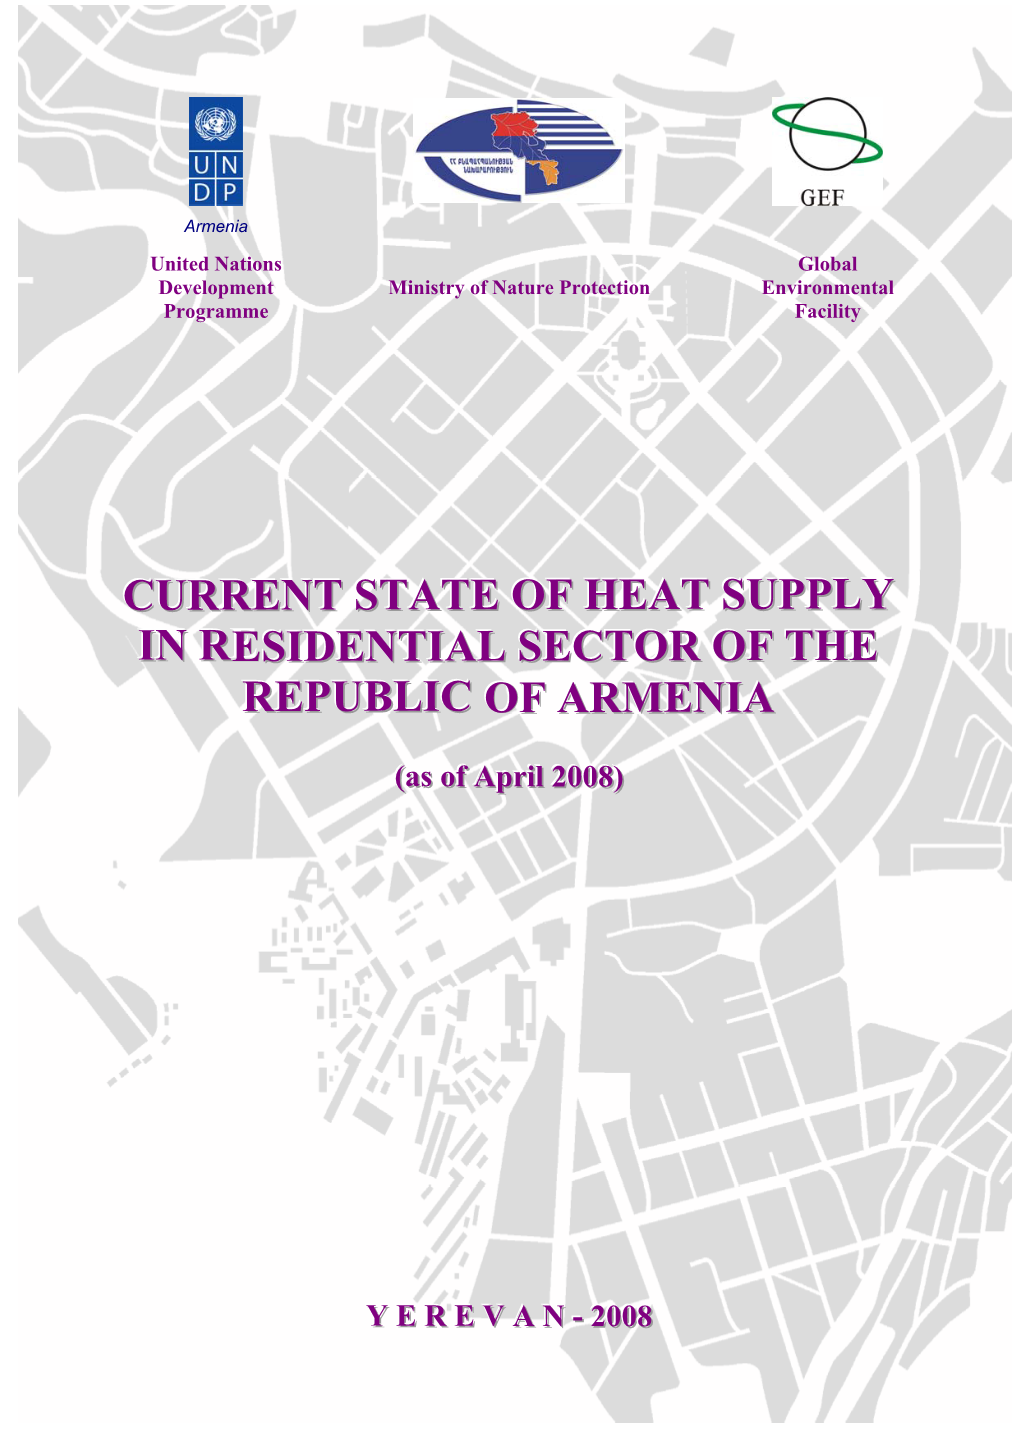 "Armenia-Improving the Energy Efficiency of Municipal Heating And